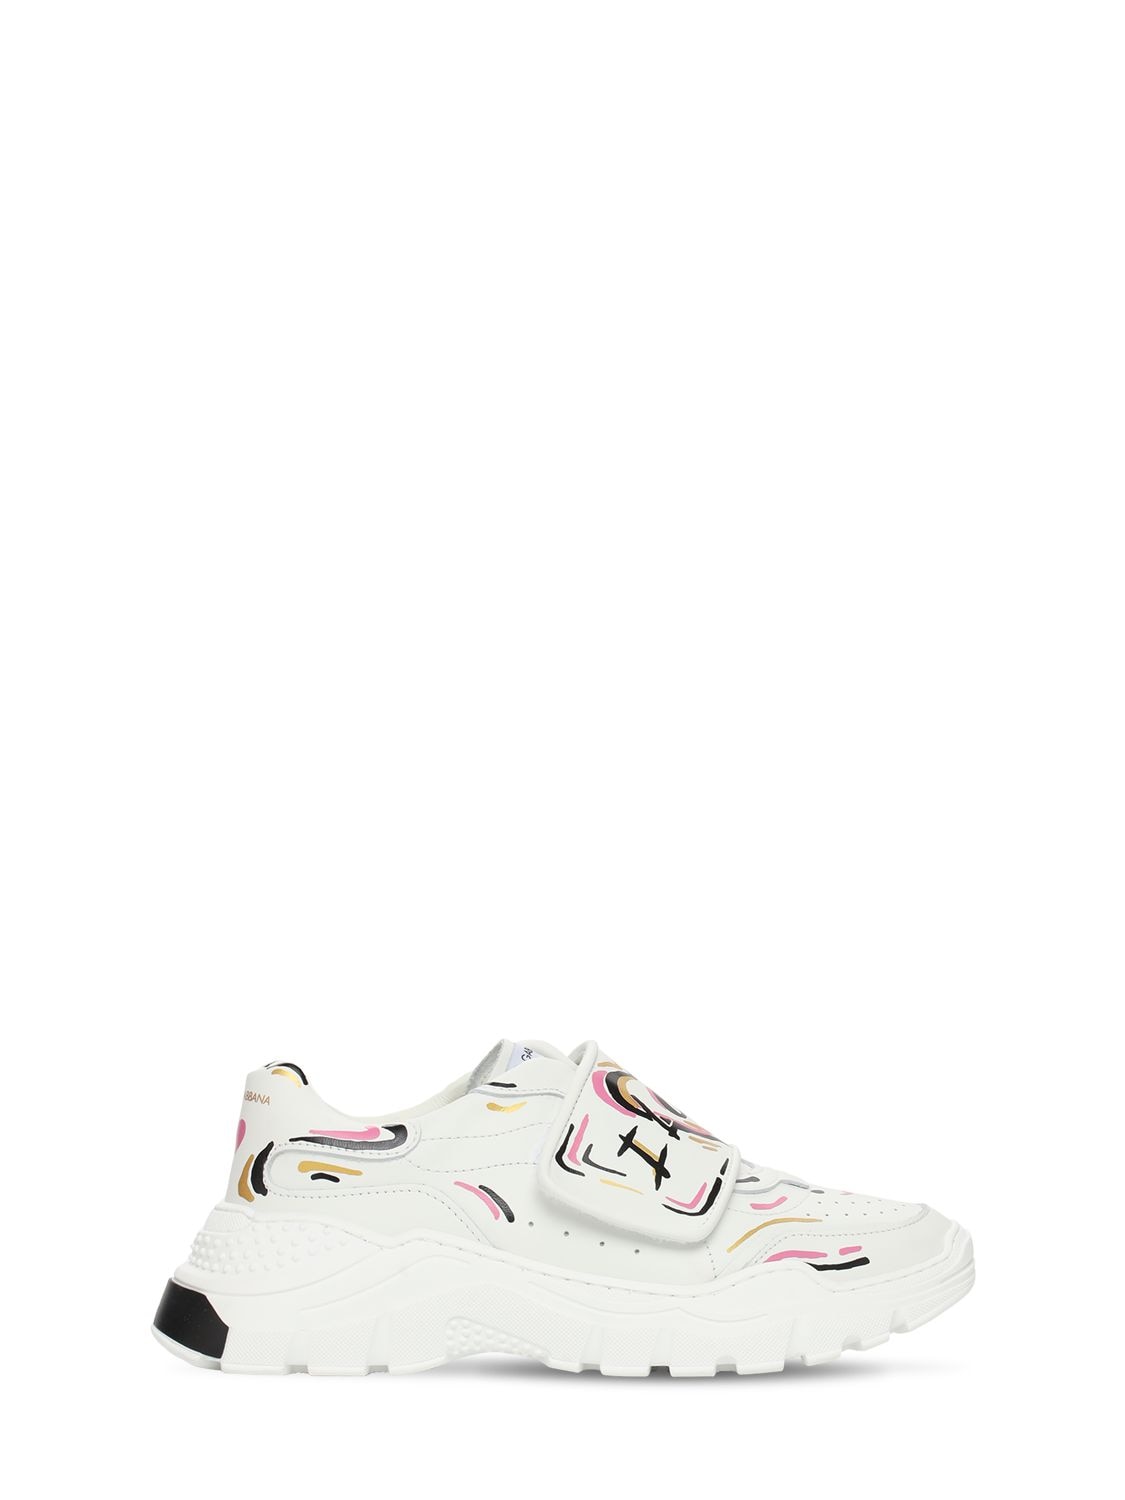 Dolce & Gabbana Kids' Printed Leather Strap Sneakers In White